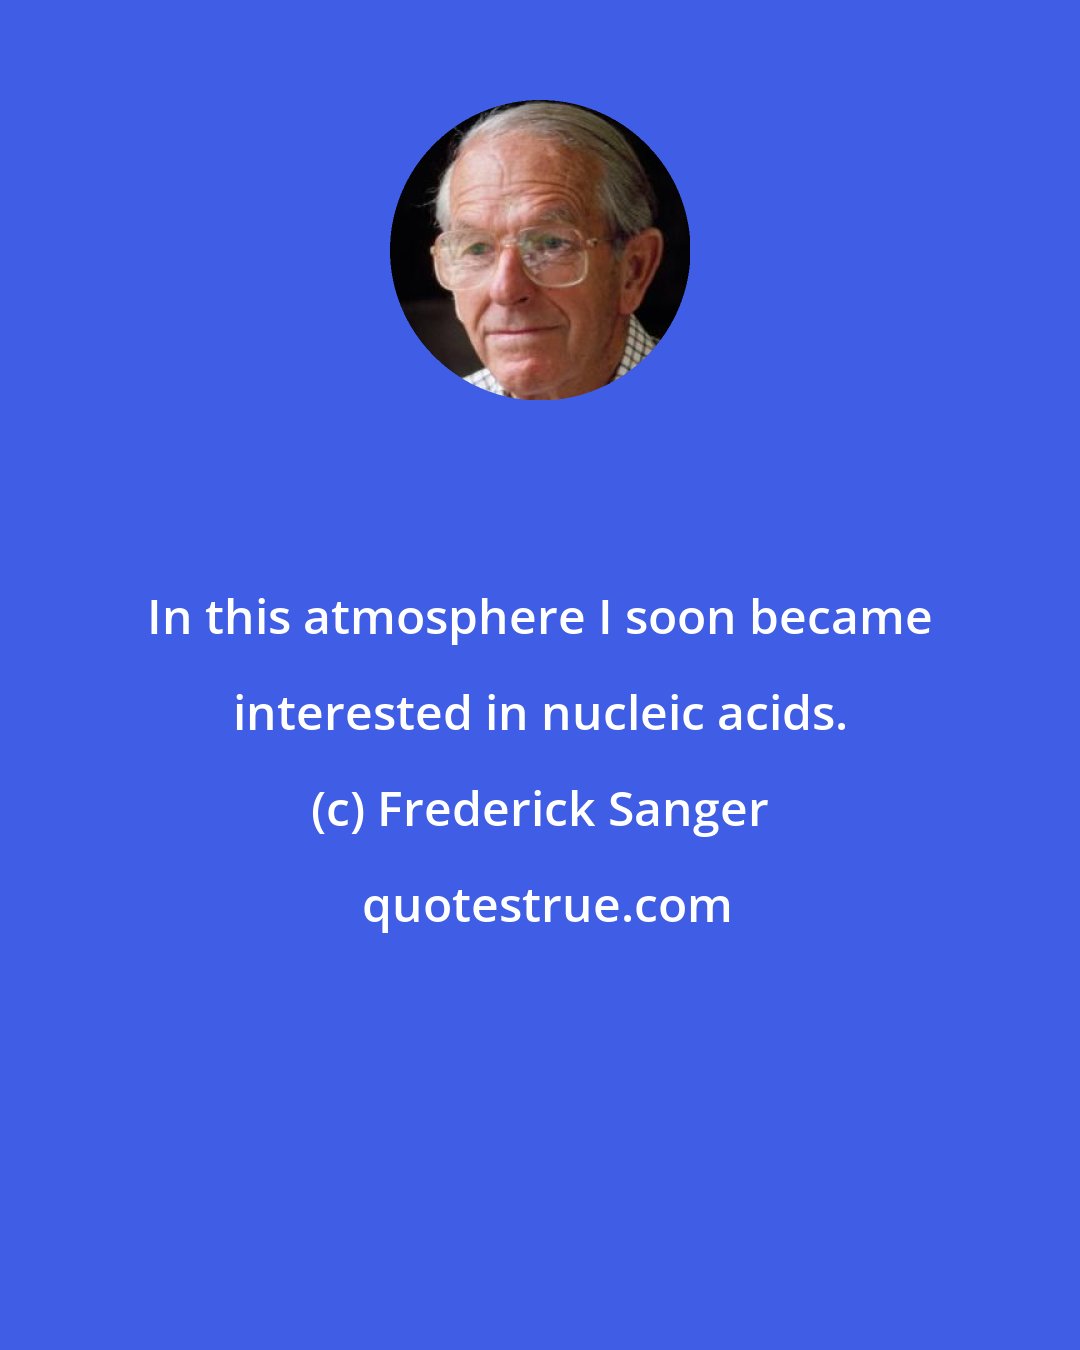 Frederick Sanger: In this atmosphere I soon became interested in nucleic acids.